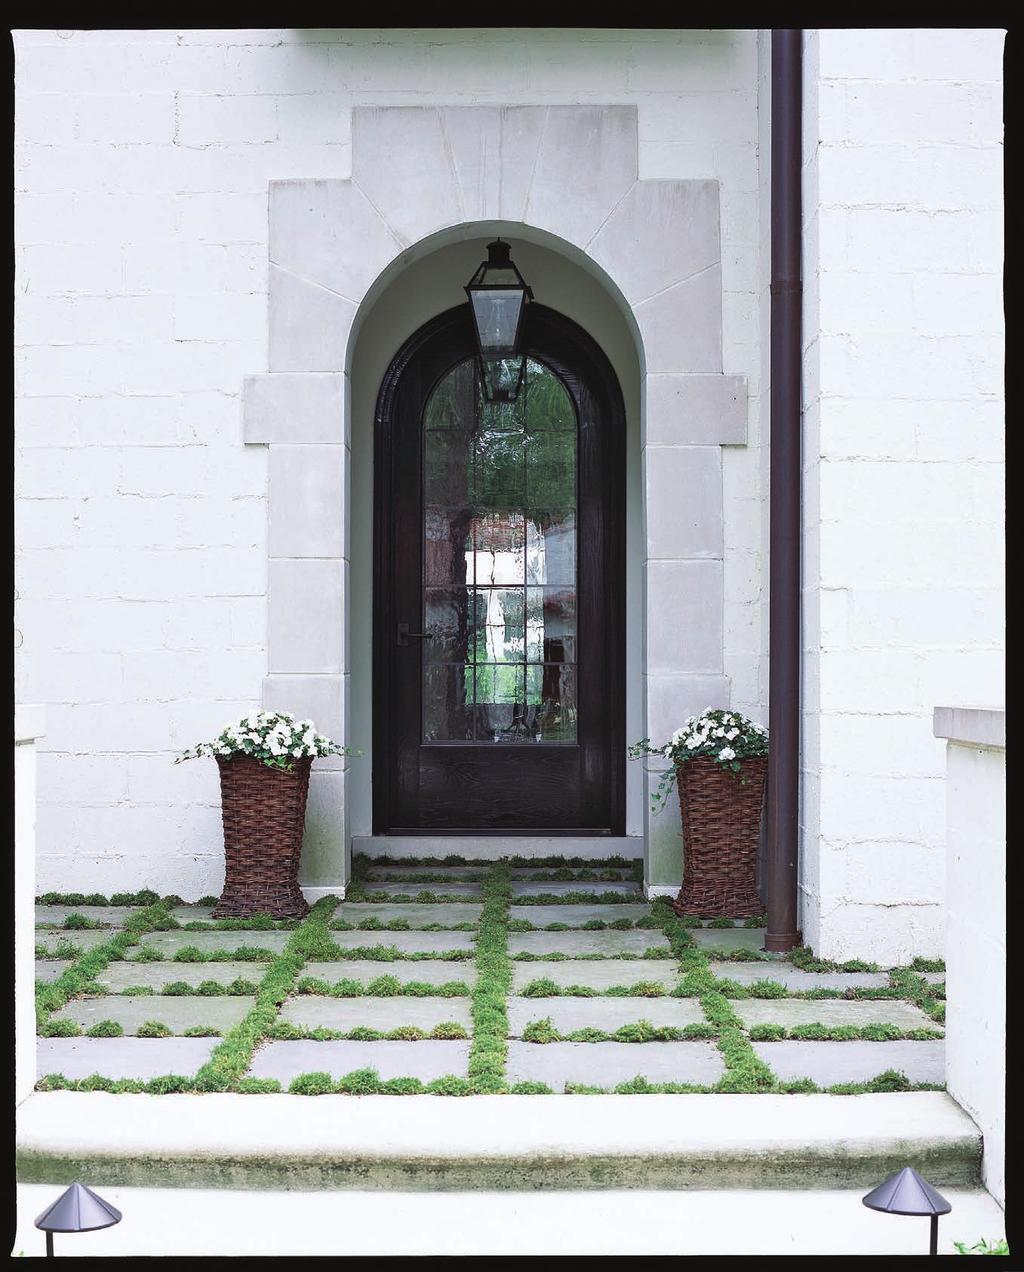 THIS PHOTO Hand-cut limestone accents and willow planters soften the look of the painted concrete cinder block.